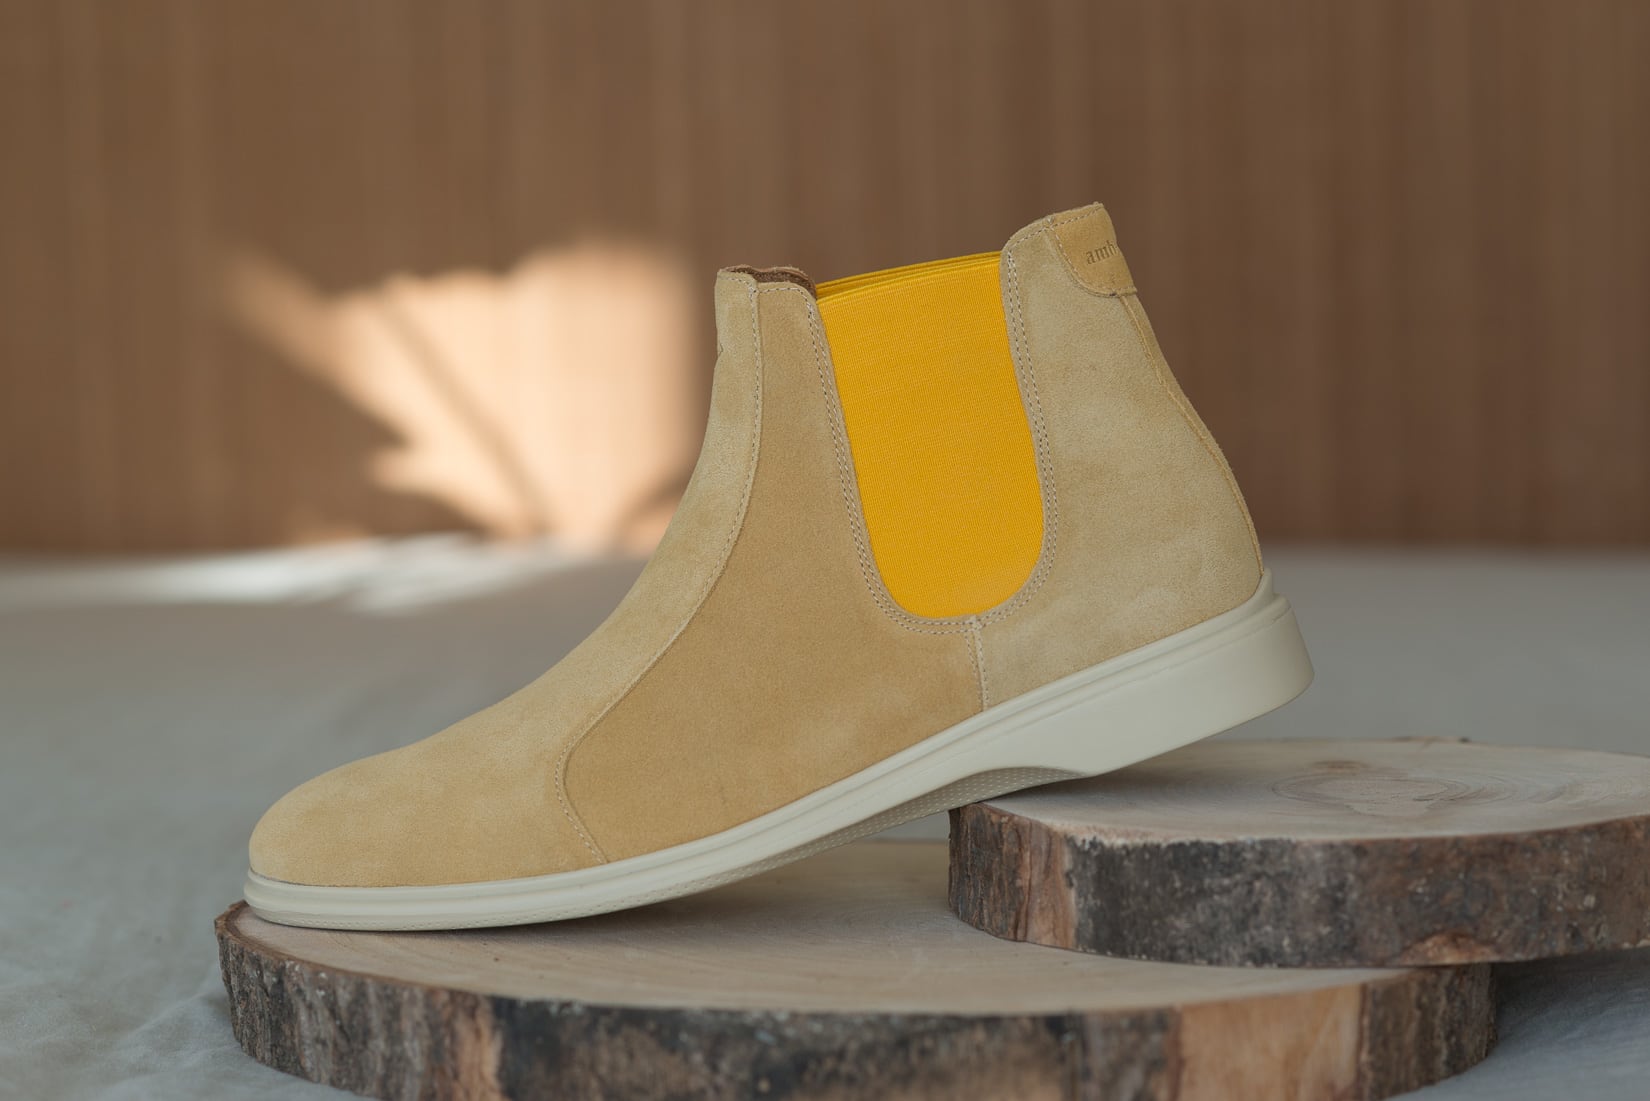 Amberjack Chelsea boots side review - Luxe Digital